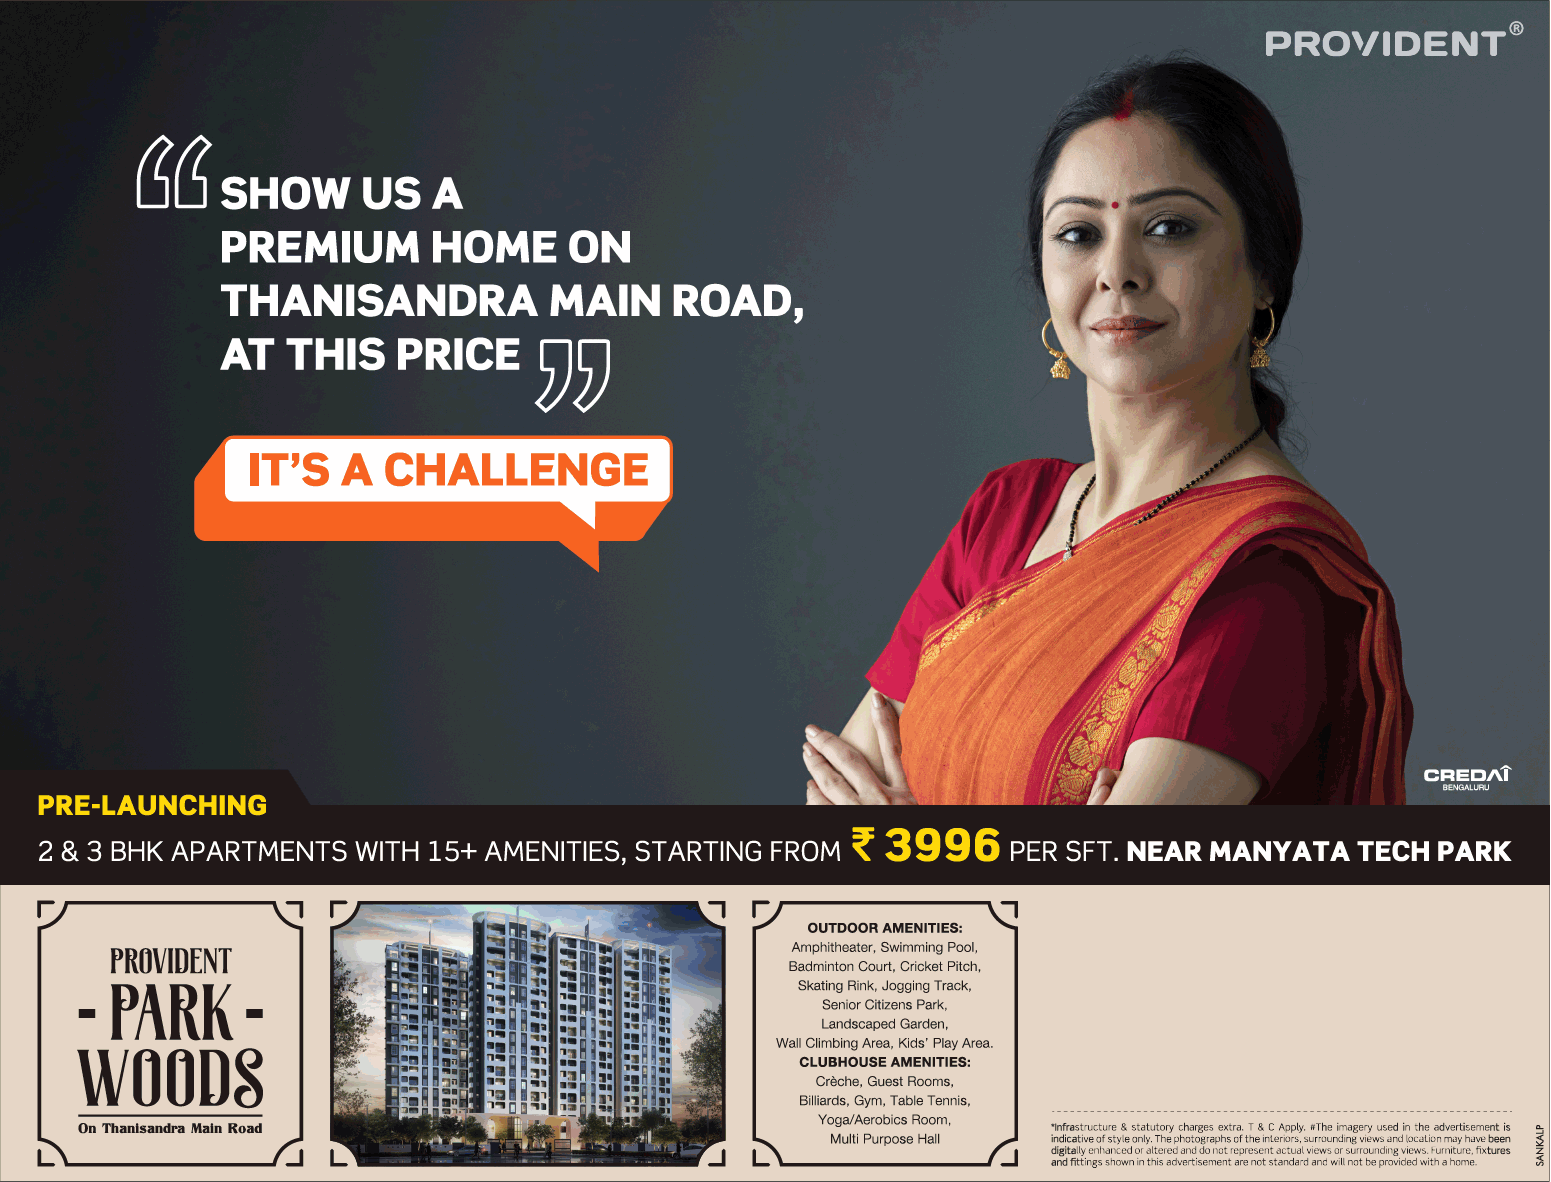 Book 2 & 3 bhk apartments with 15+ amenities at Rs. 3996 per sqft at Provident Park Woods in Bangalore Update